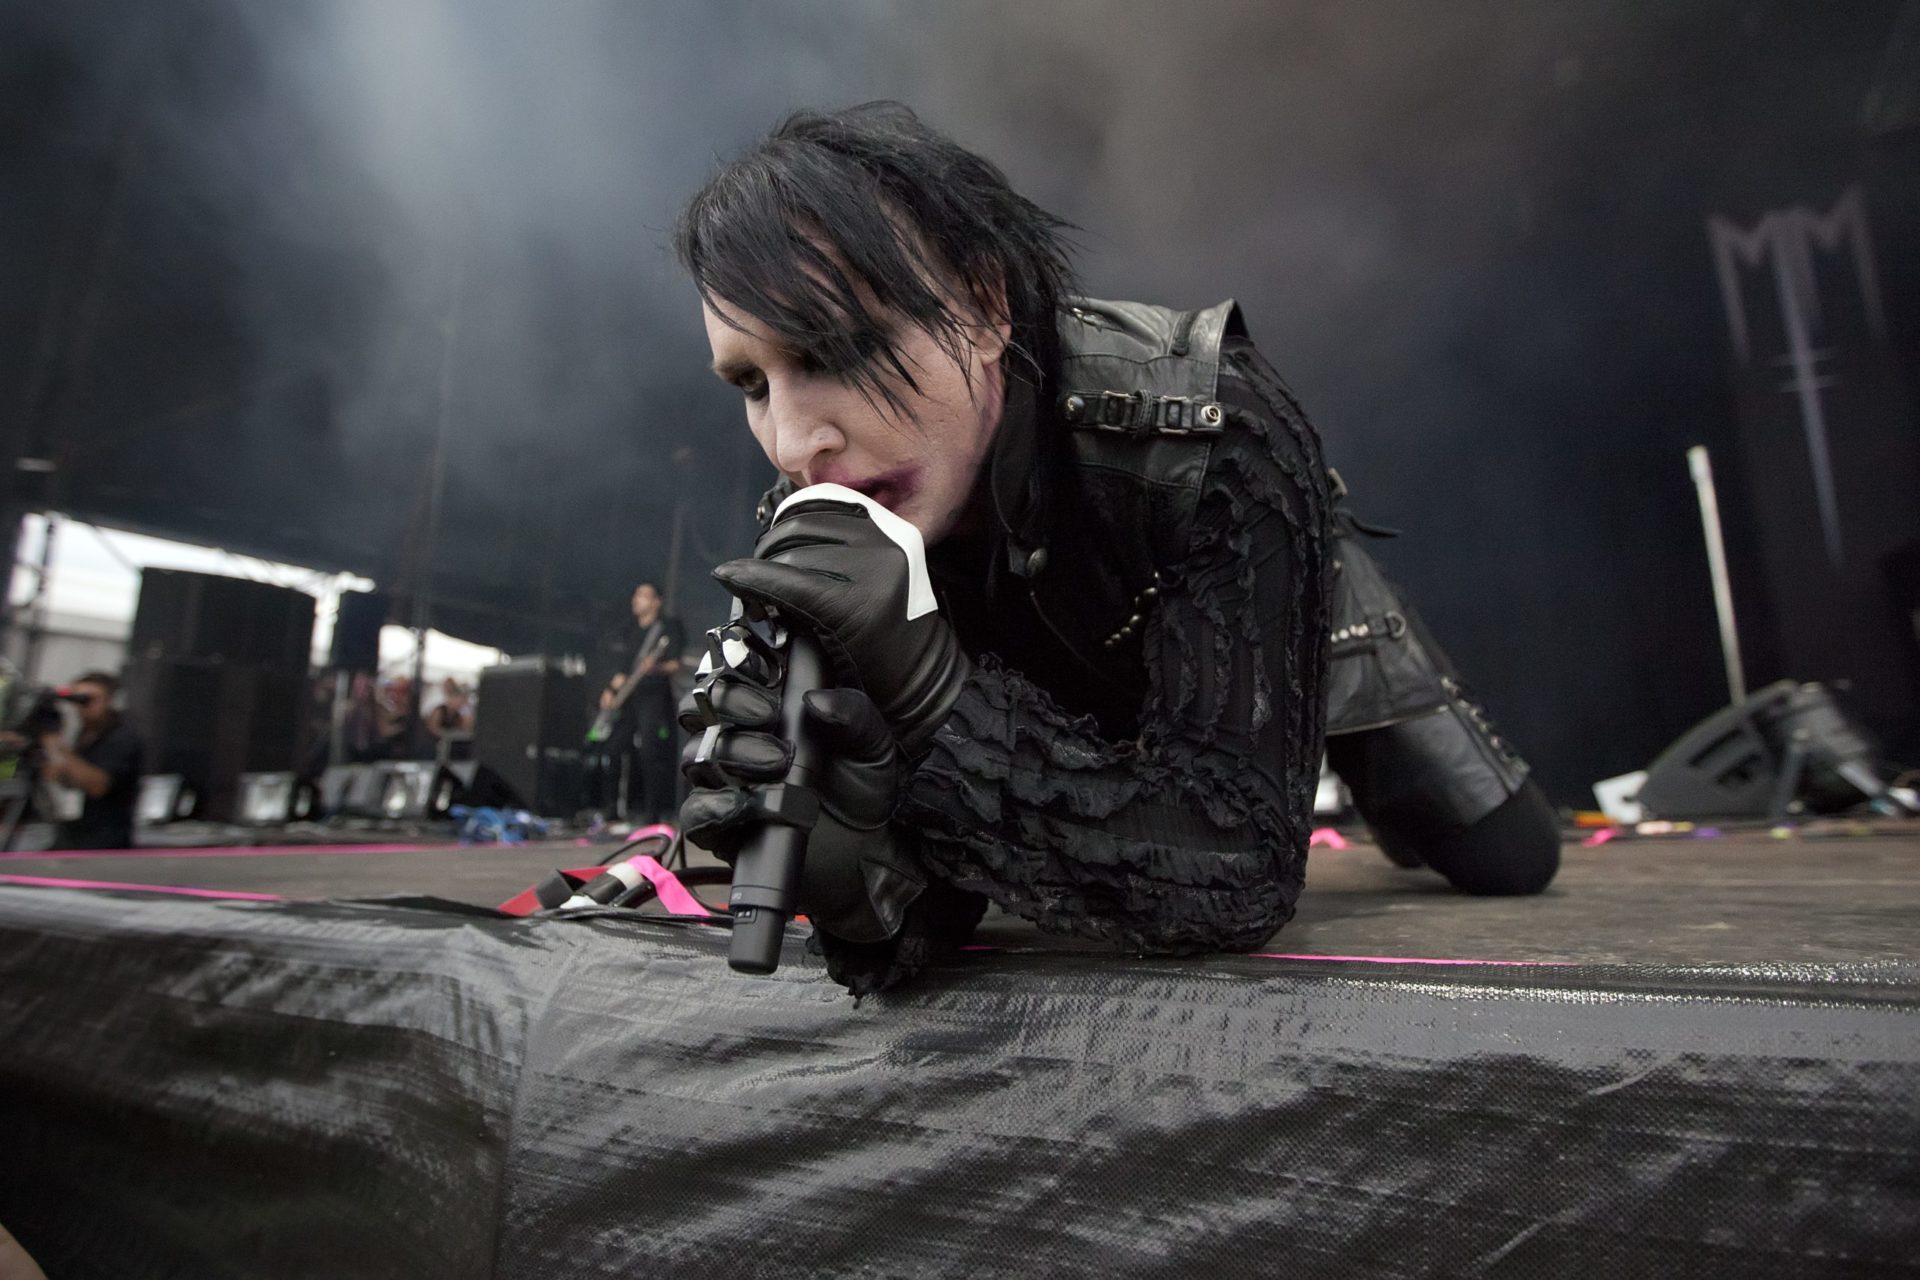 Marilyn Manson @ Adelaide Soundwave, March ’12